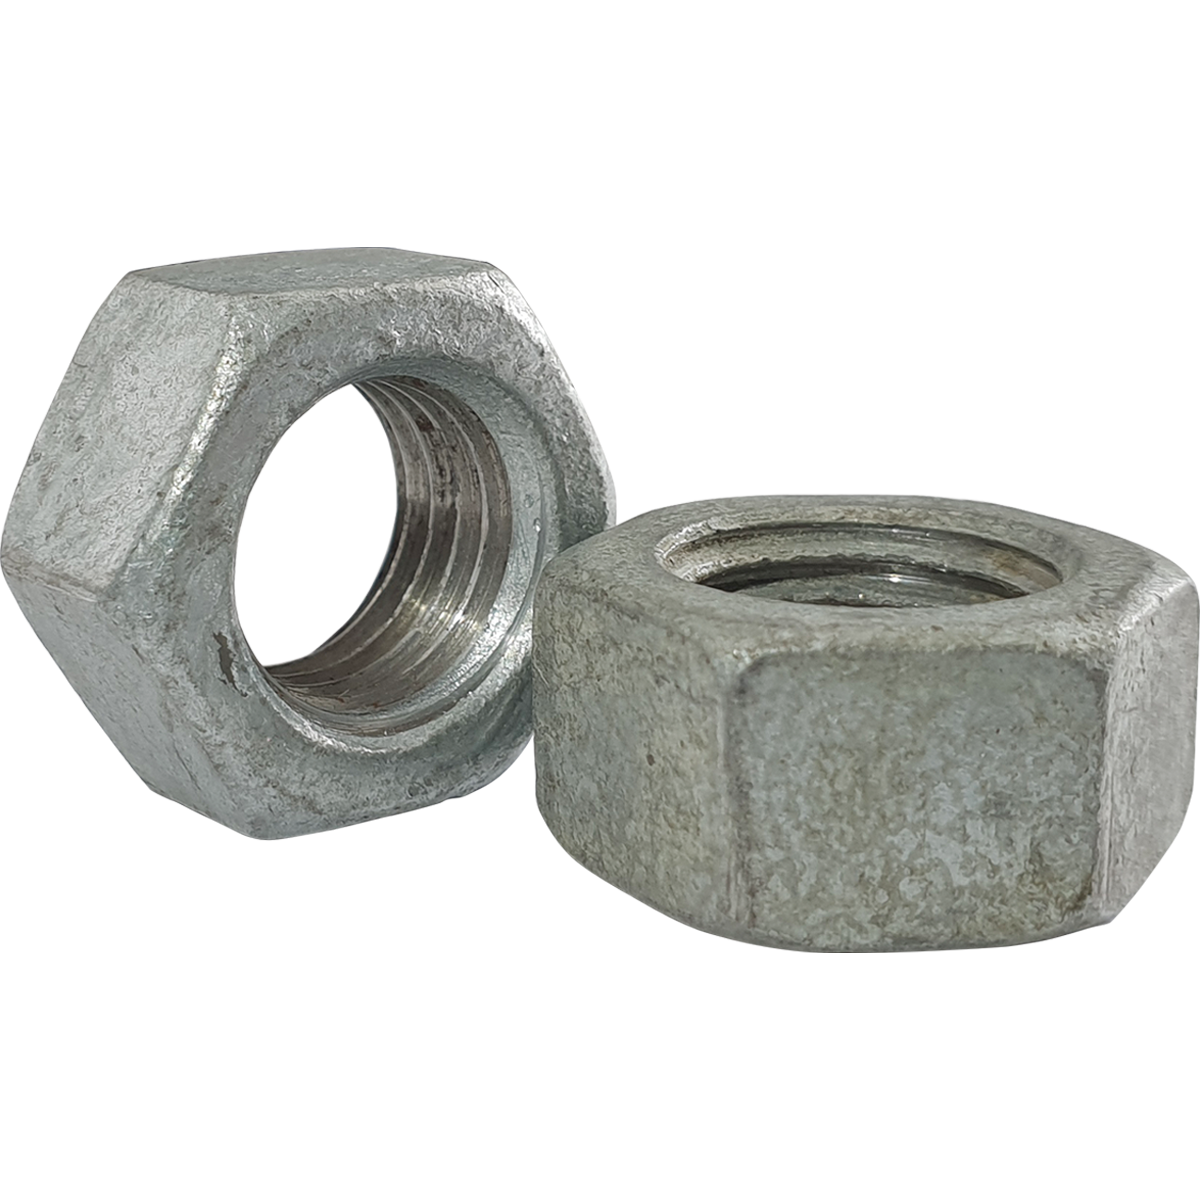 Competitively priced, corrosion resistant HDGV (Hot Dipped Galvanised) hex nuts with bulk discounts available across the range at Fusion Fixings.